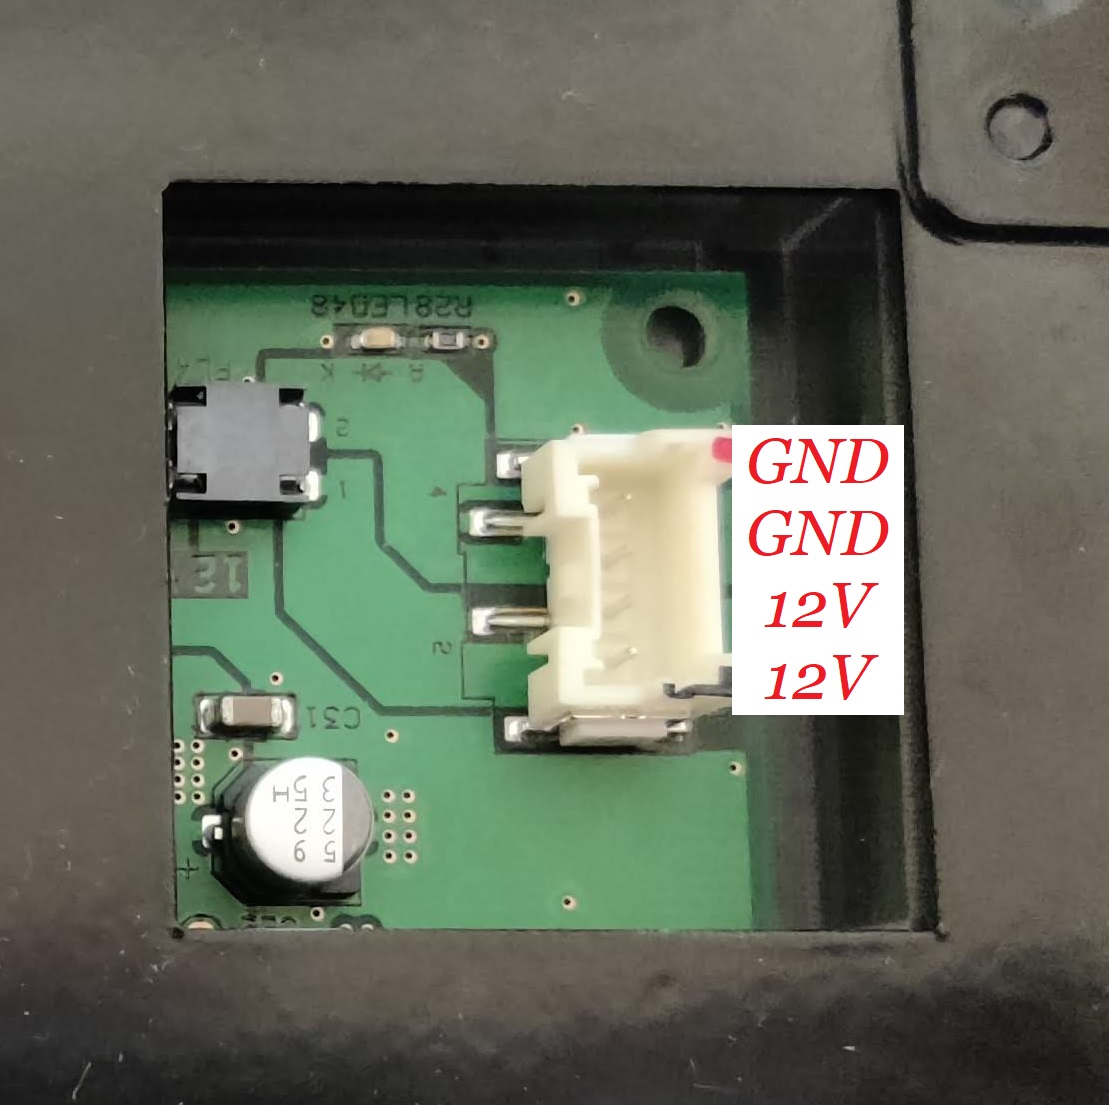 Image showing the rightmost connector on the chunithm arcade slider. The connector is annotated, top to bottom, with the pinouts of GND, GND, 12V, 12V.